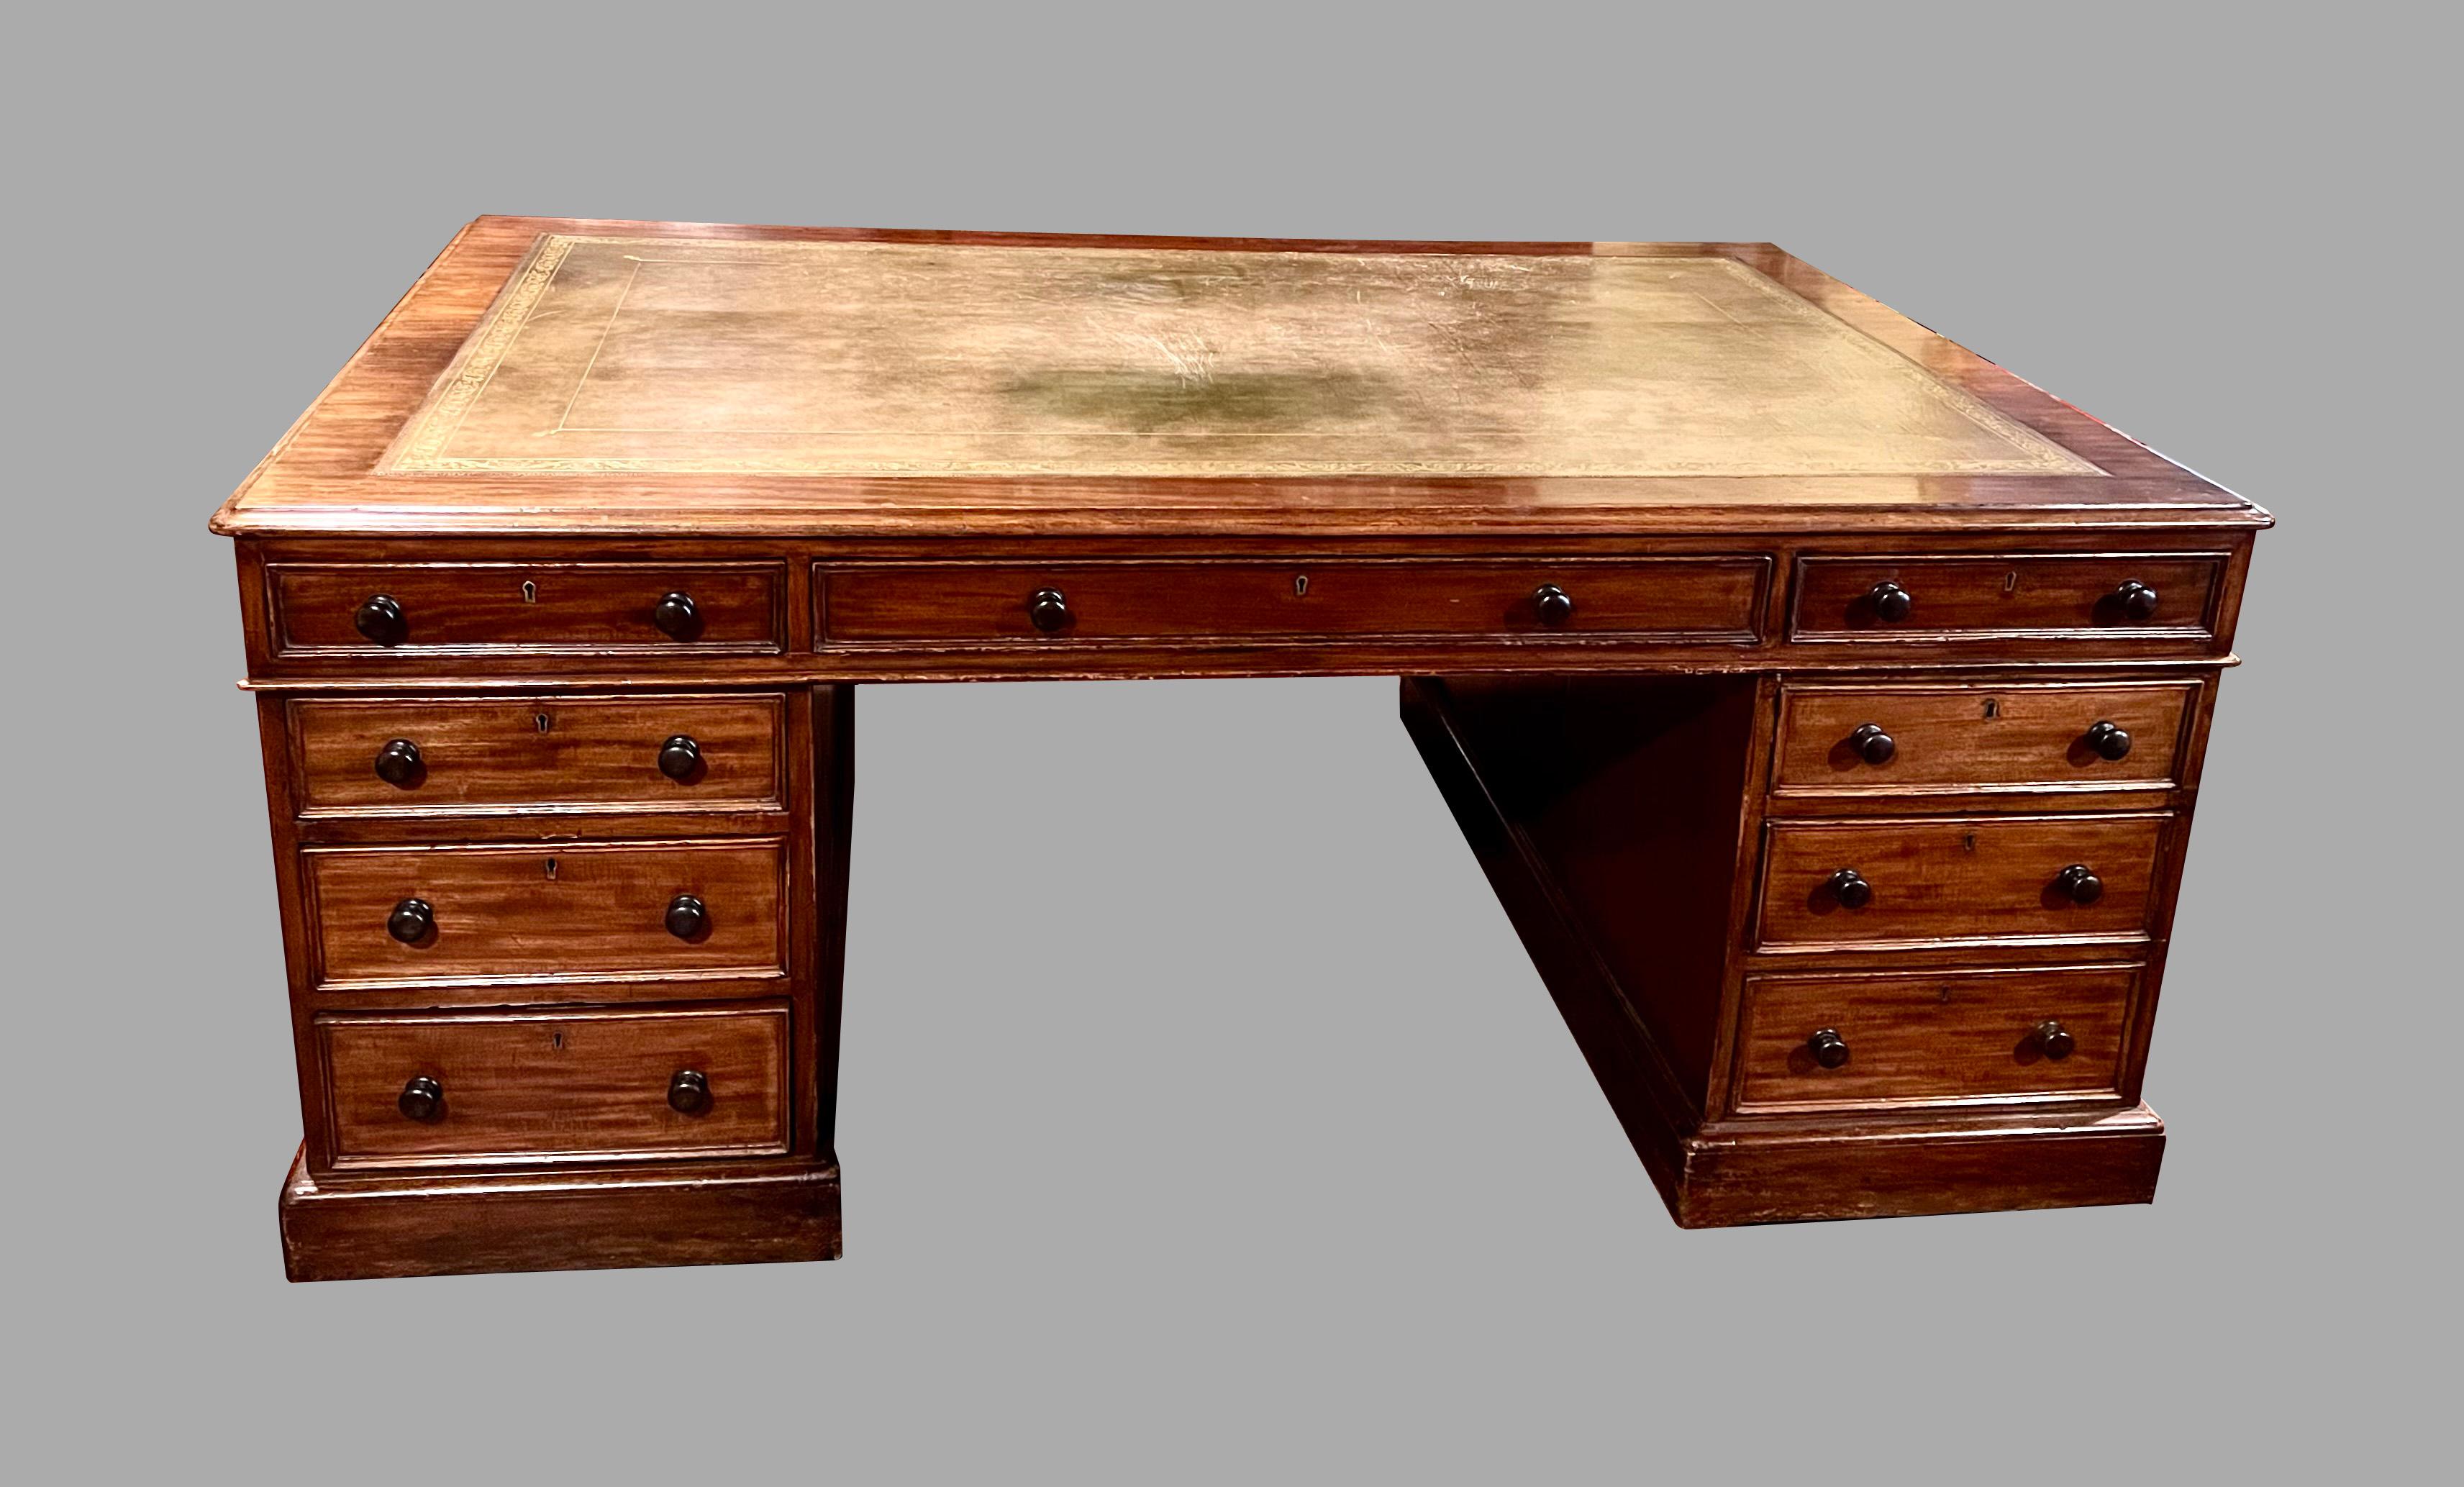 A good quality English Georgian style partners desk of typical form, the brown gilt-tooled leather top above 3 frieze drawers supported by 2 pedestals each with 3 graduated drawers all supported on a plinth base supported on later casters. The